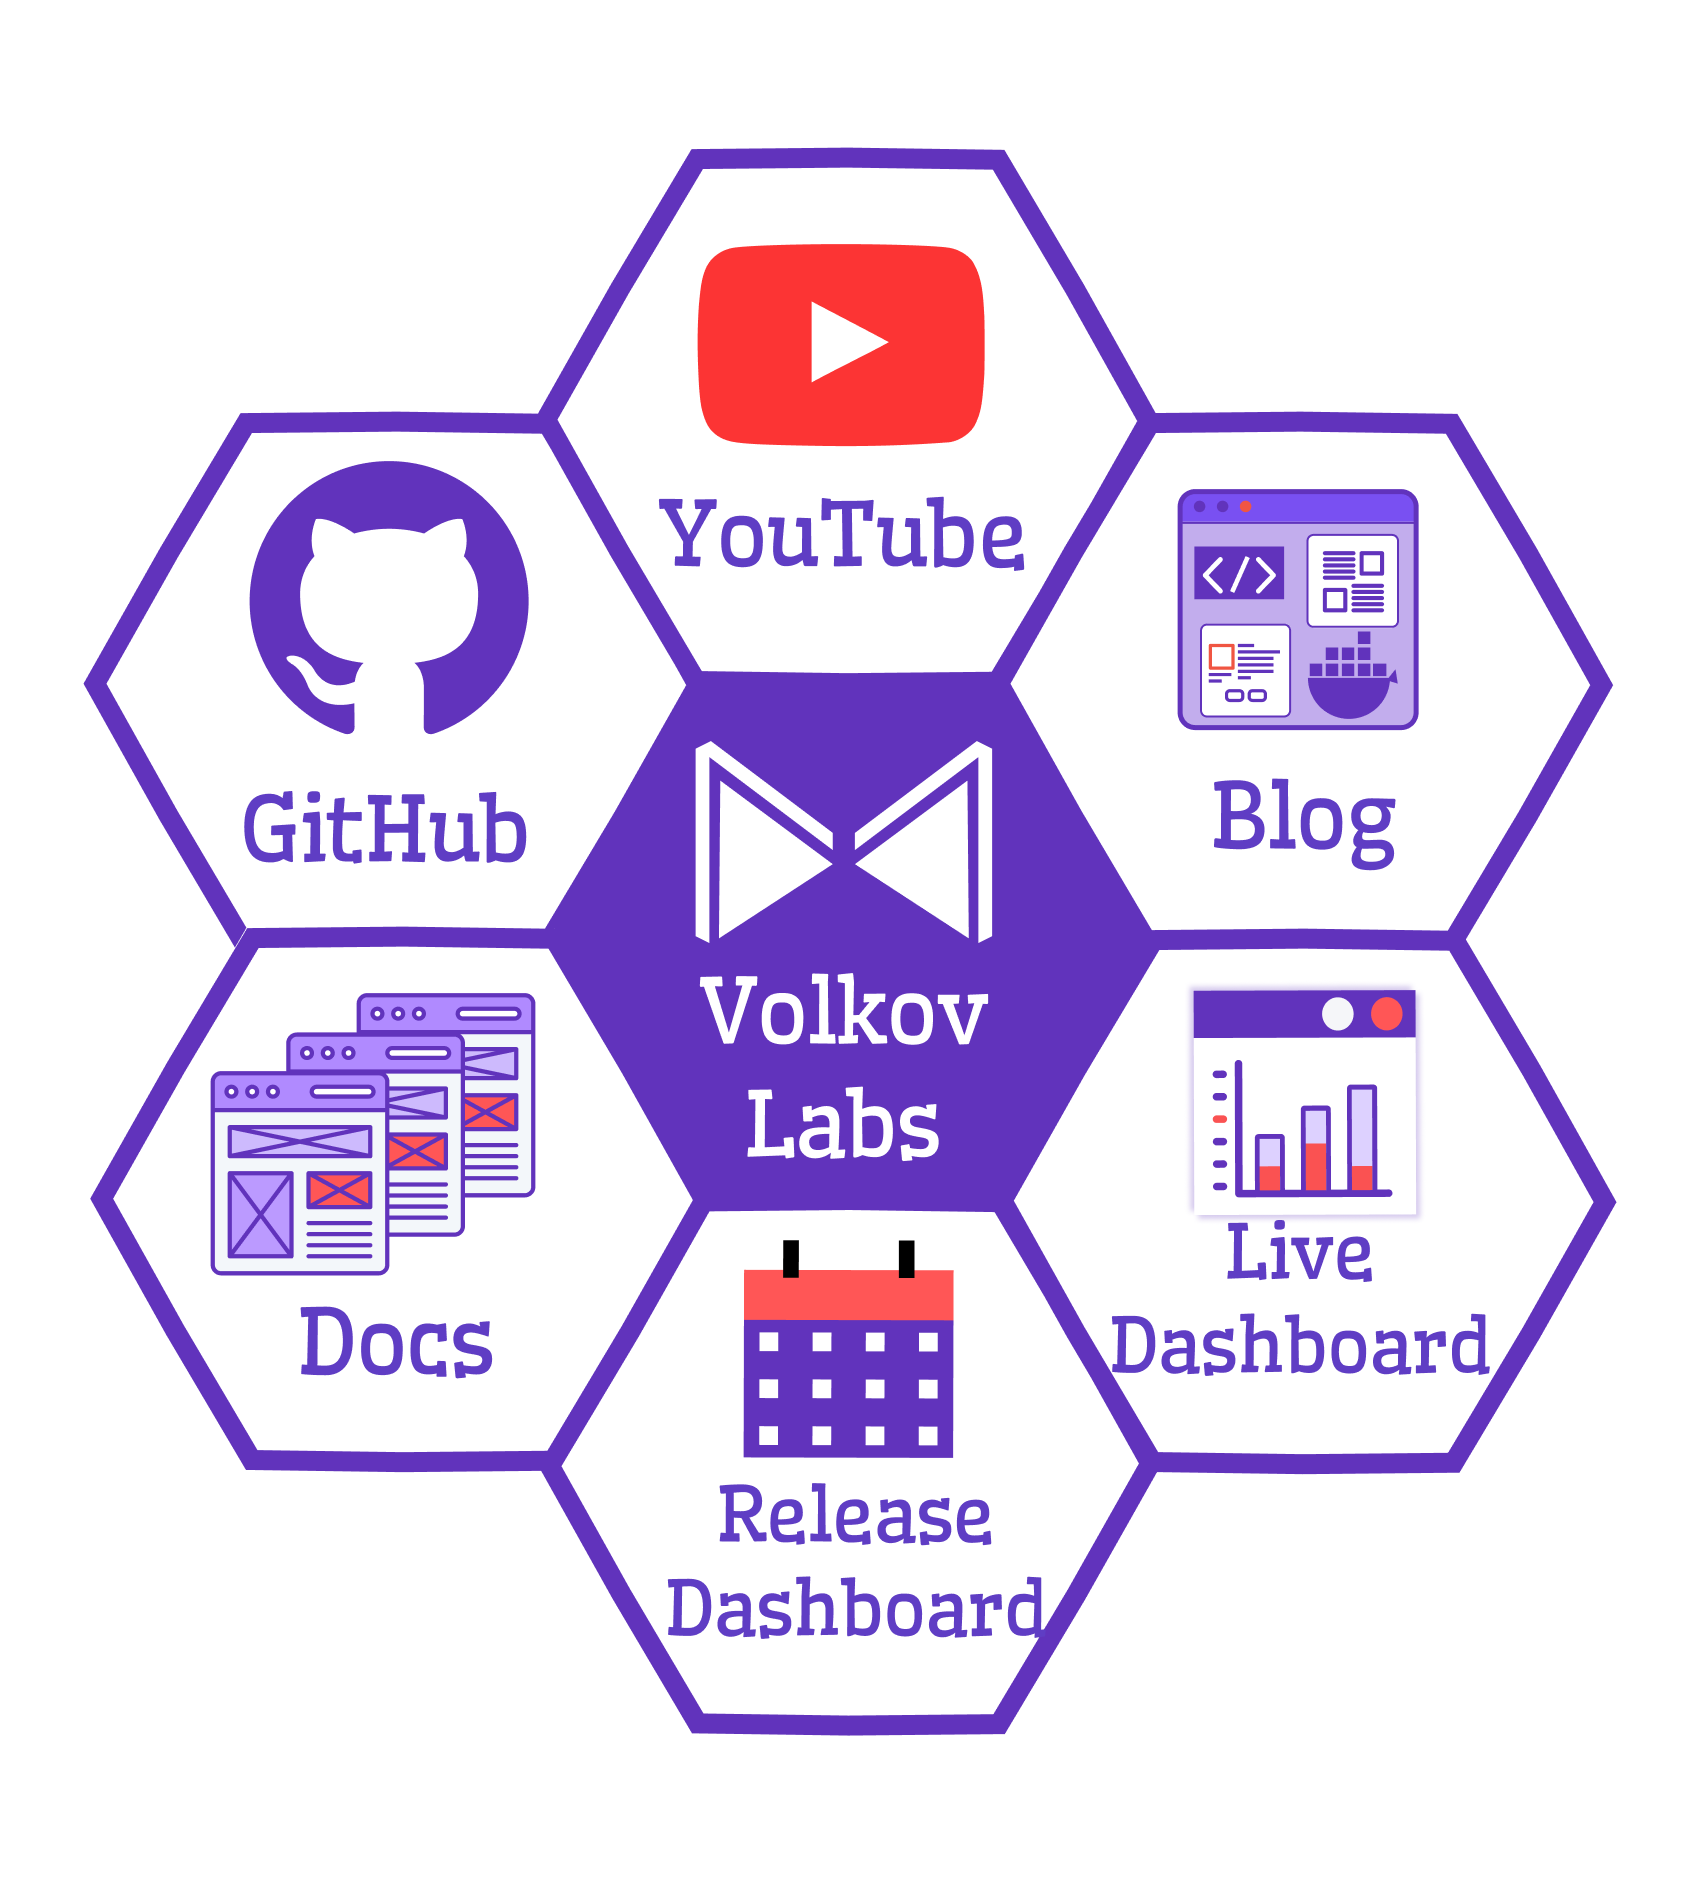 Volkov Labs platform where YouTube has its honorable spot.